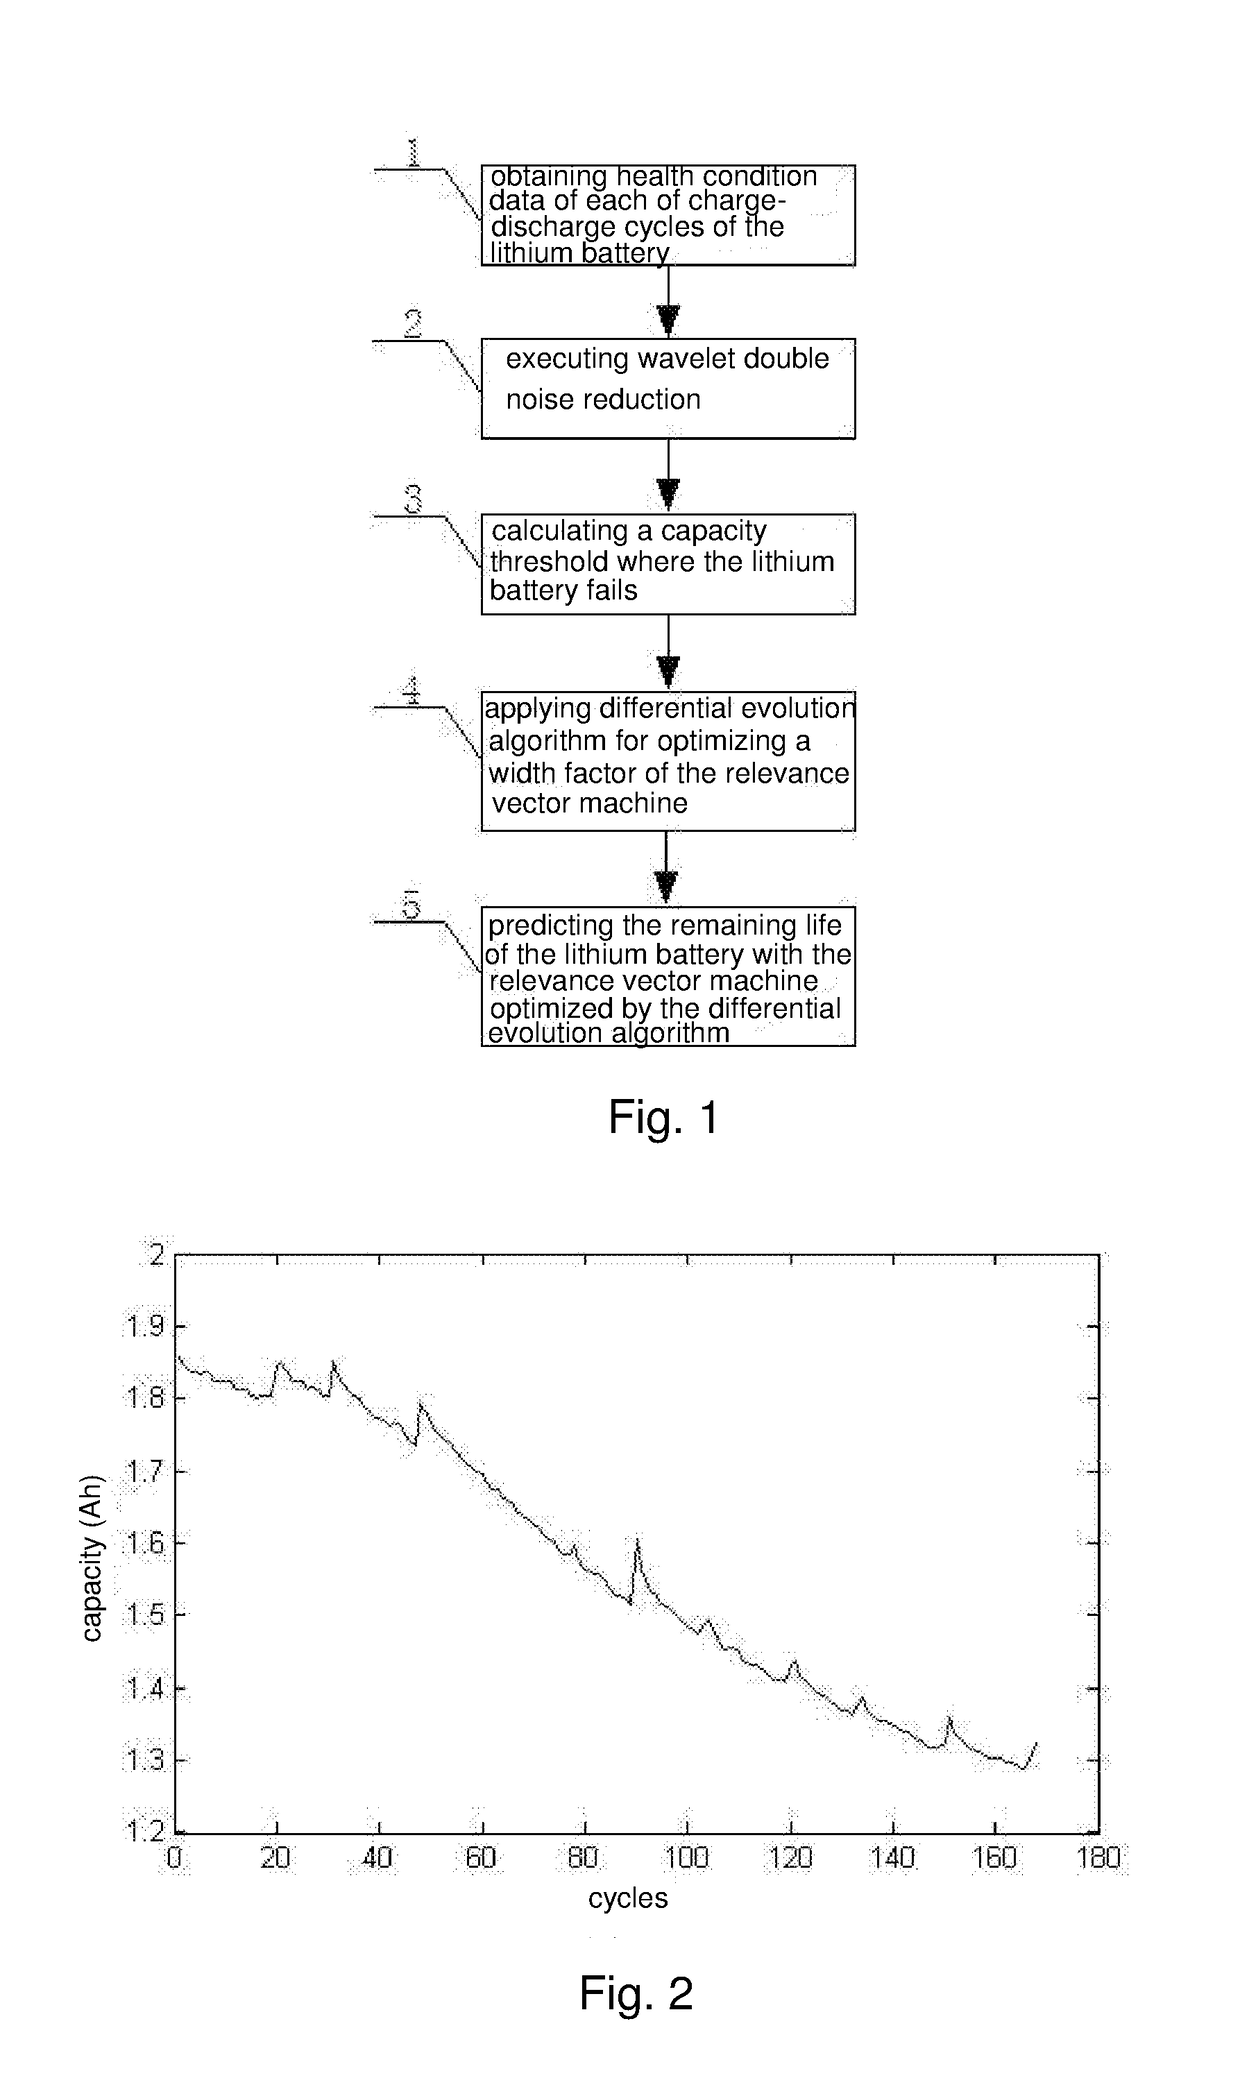 Method for predicting remaining useful life of lithium battery based on wavelet denoising and relevance vector machine